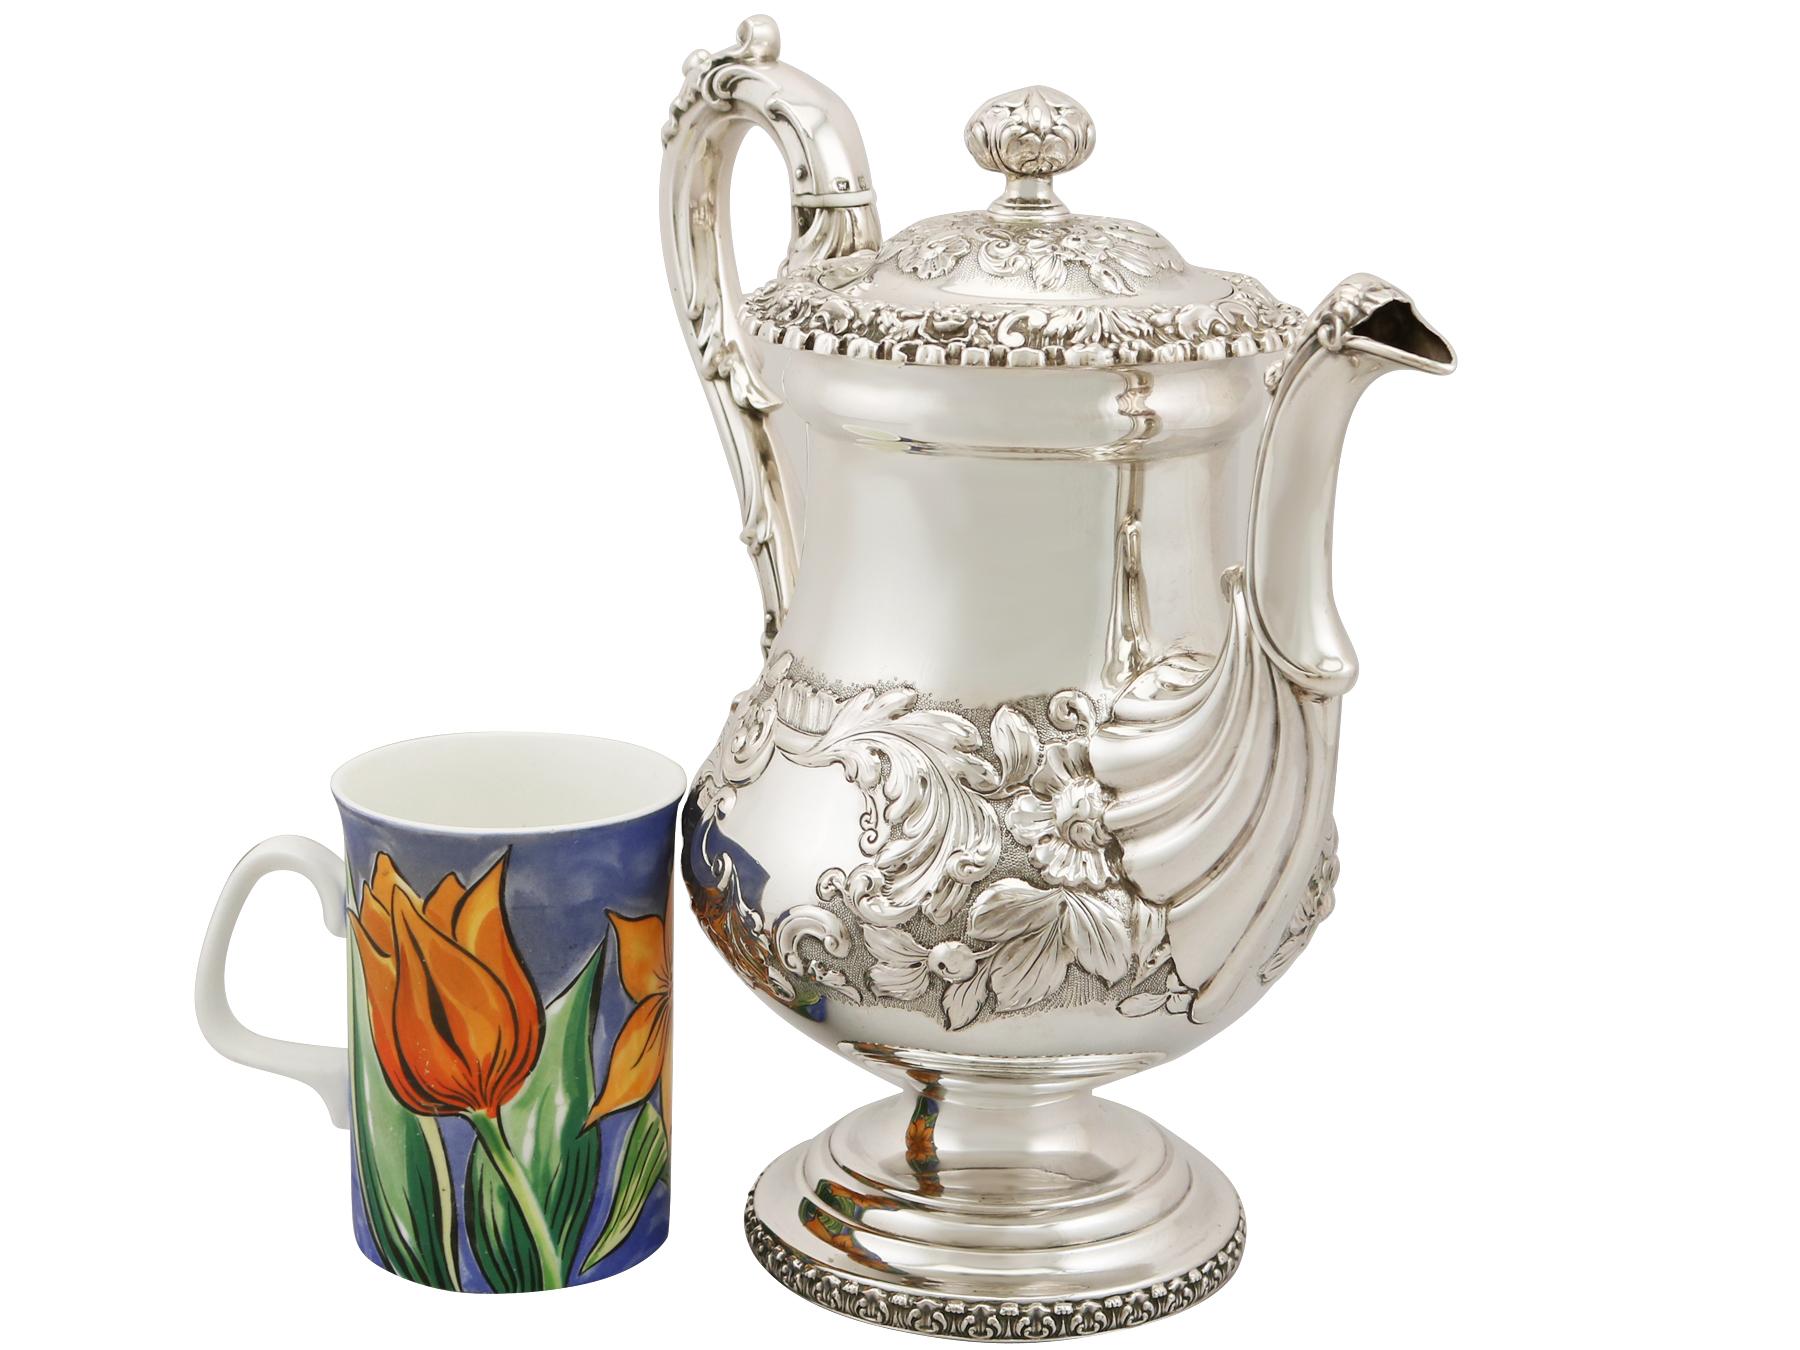 A fine and impressive antique George IV English sterling silver coffee pot; an addition to our silver teaware collection

This exceptional antique George IV sterling silver coffee pot has a baluster shaped form onto a circular pedestal